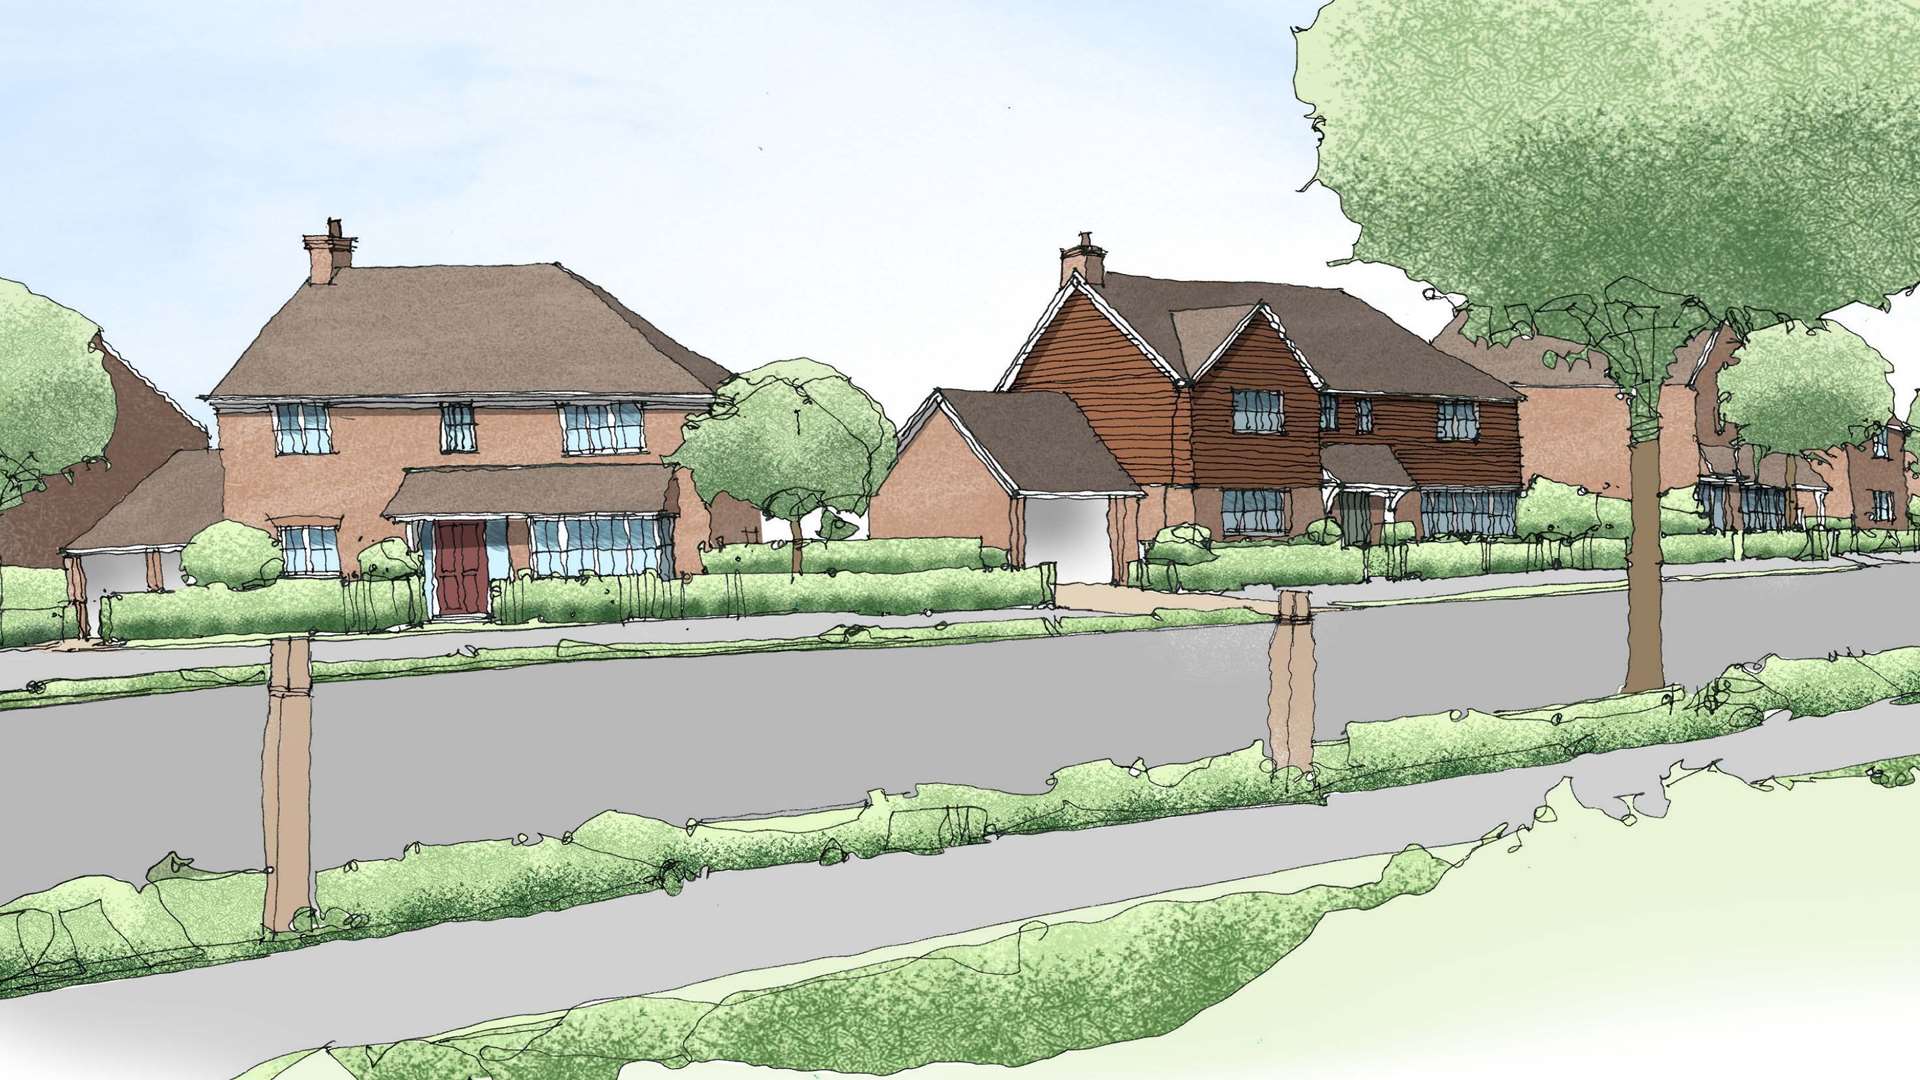 CGIs show how the new Willesborough Lees development could look